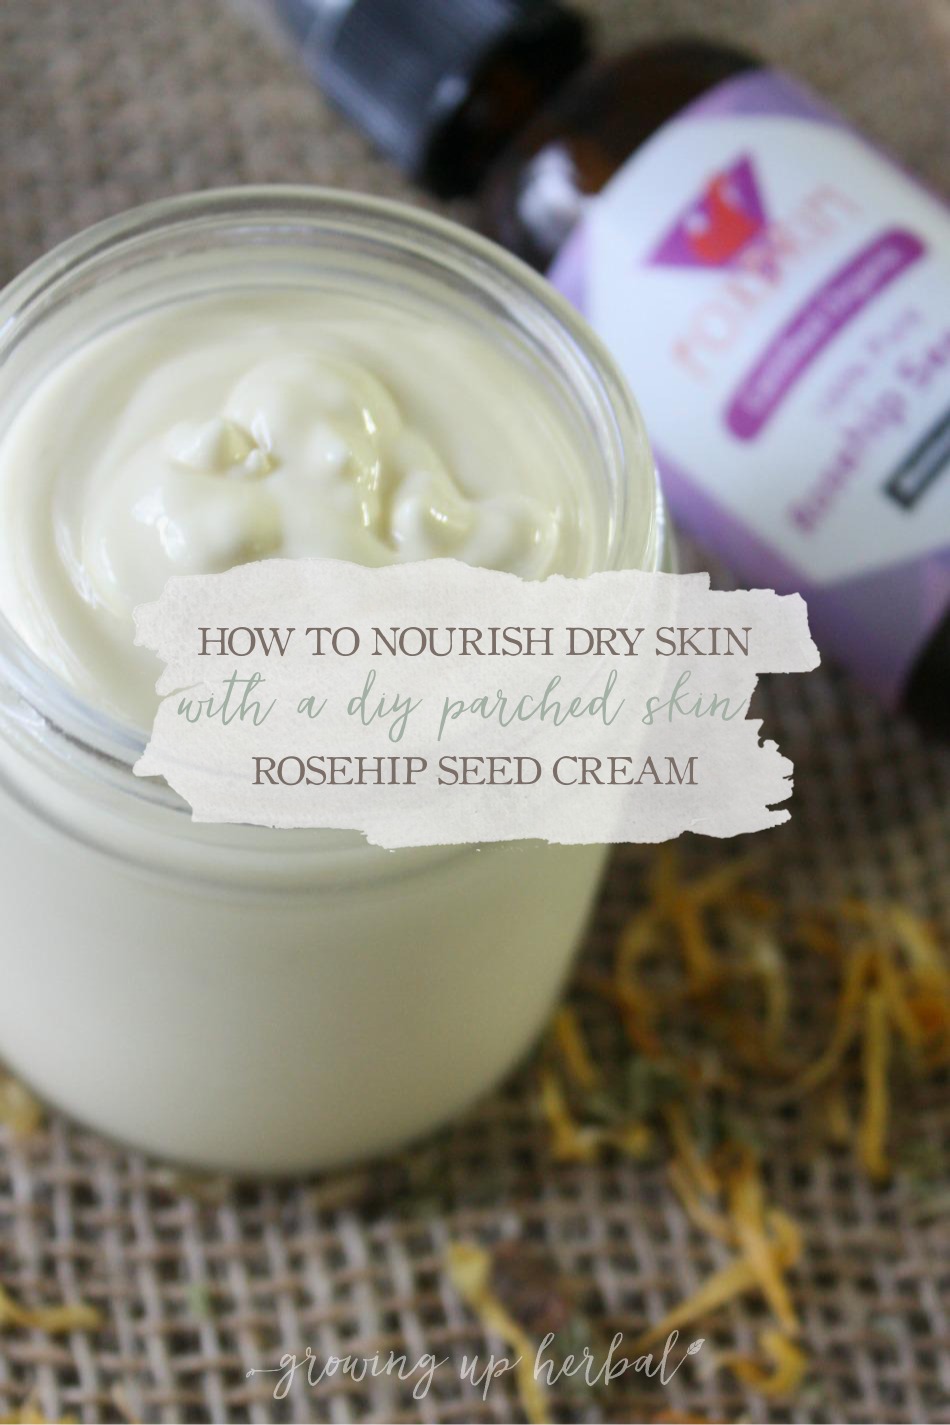 How To Nourish Dry Skin With A DIY Parched Skin Rosehip Seed Cream | Growing Up Herbal | Nourish dry skin with this specially formulated rosehip seed cream.